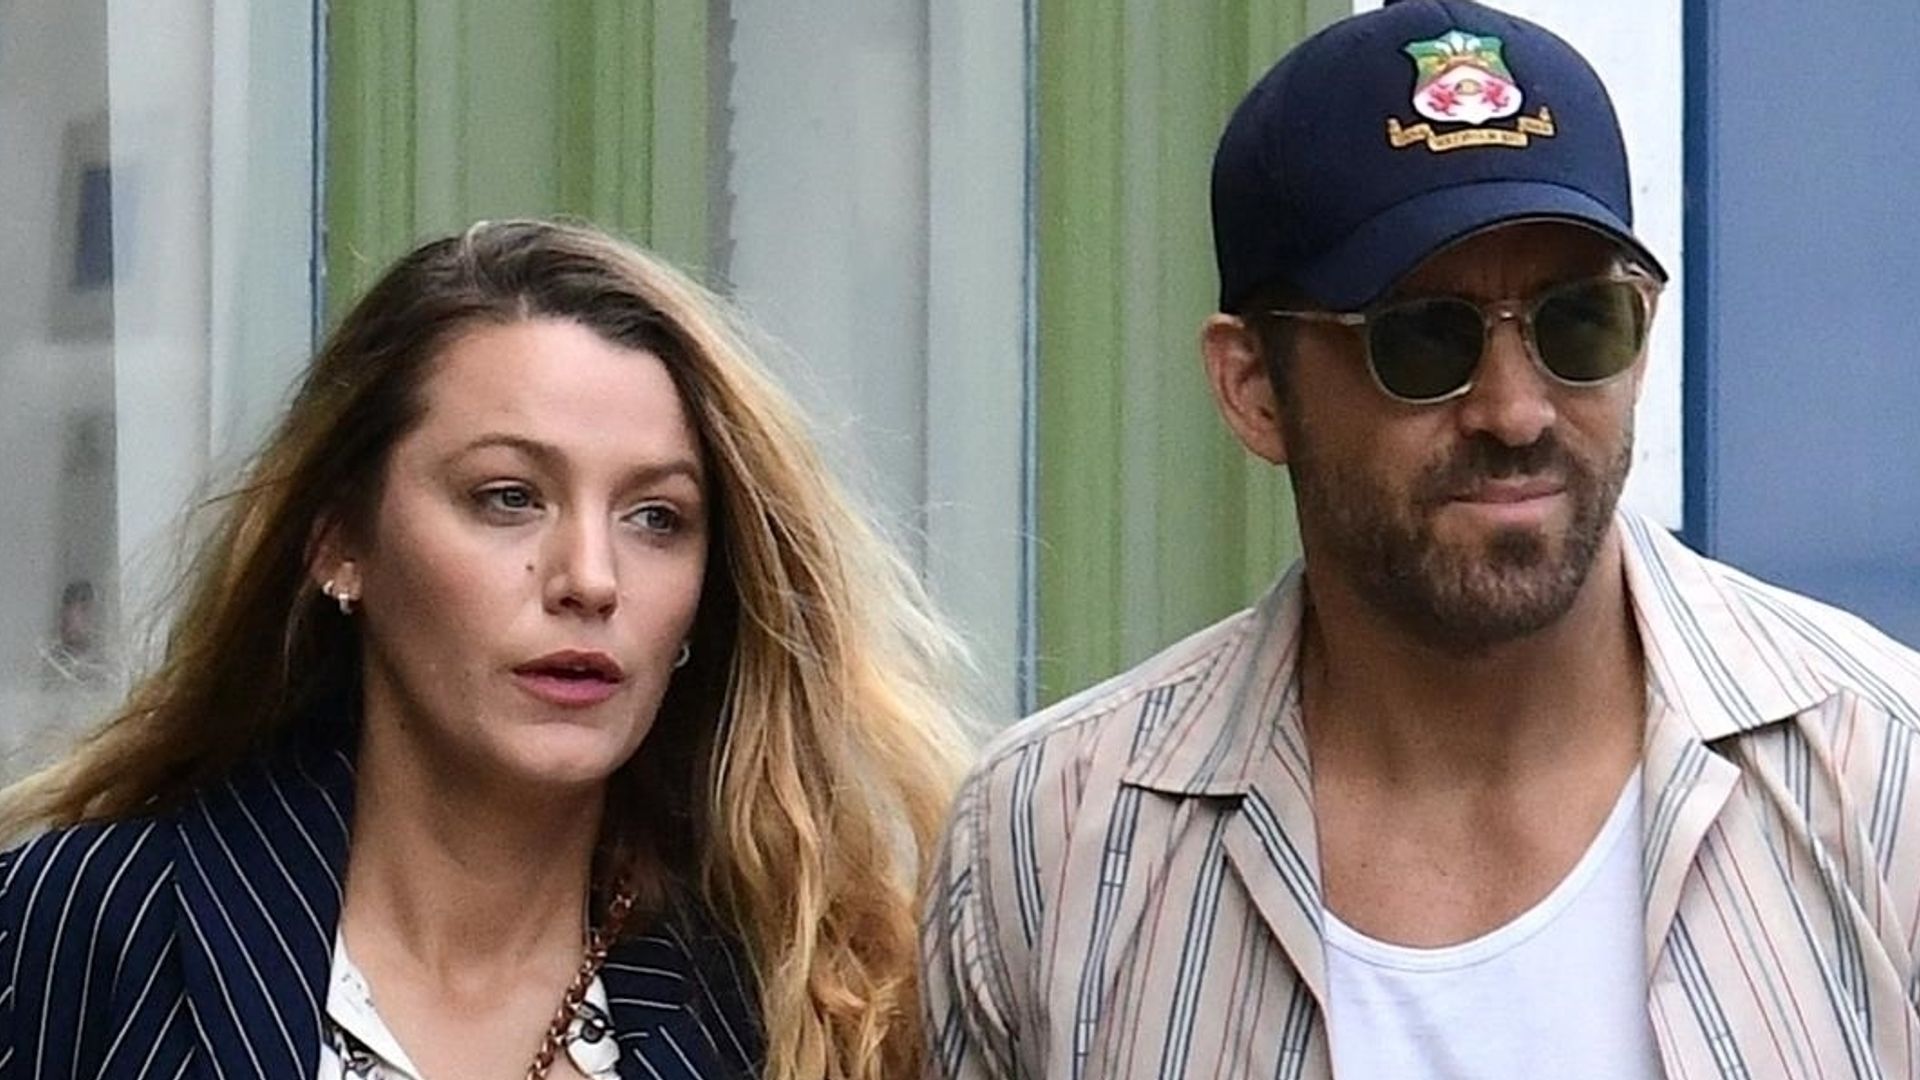 Ryan Reynolds and Blake Lively in Paris holding hands